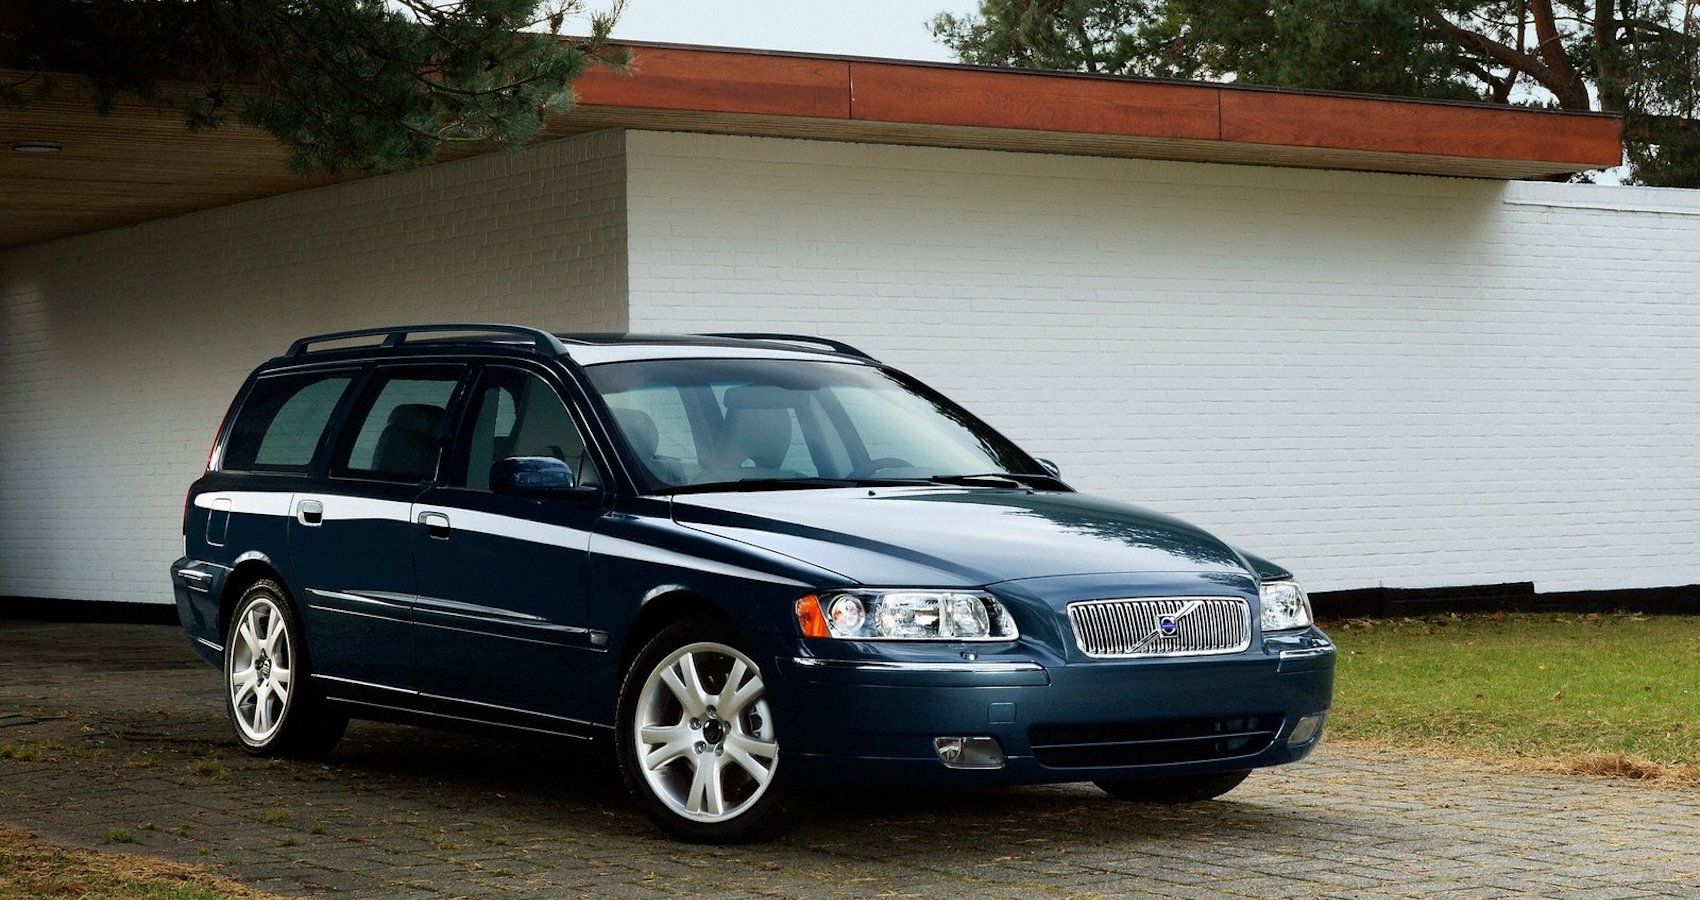 10 Reasons The Volvo V70 Has Always Been One Of The Best Family Haulers